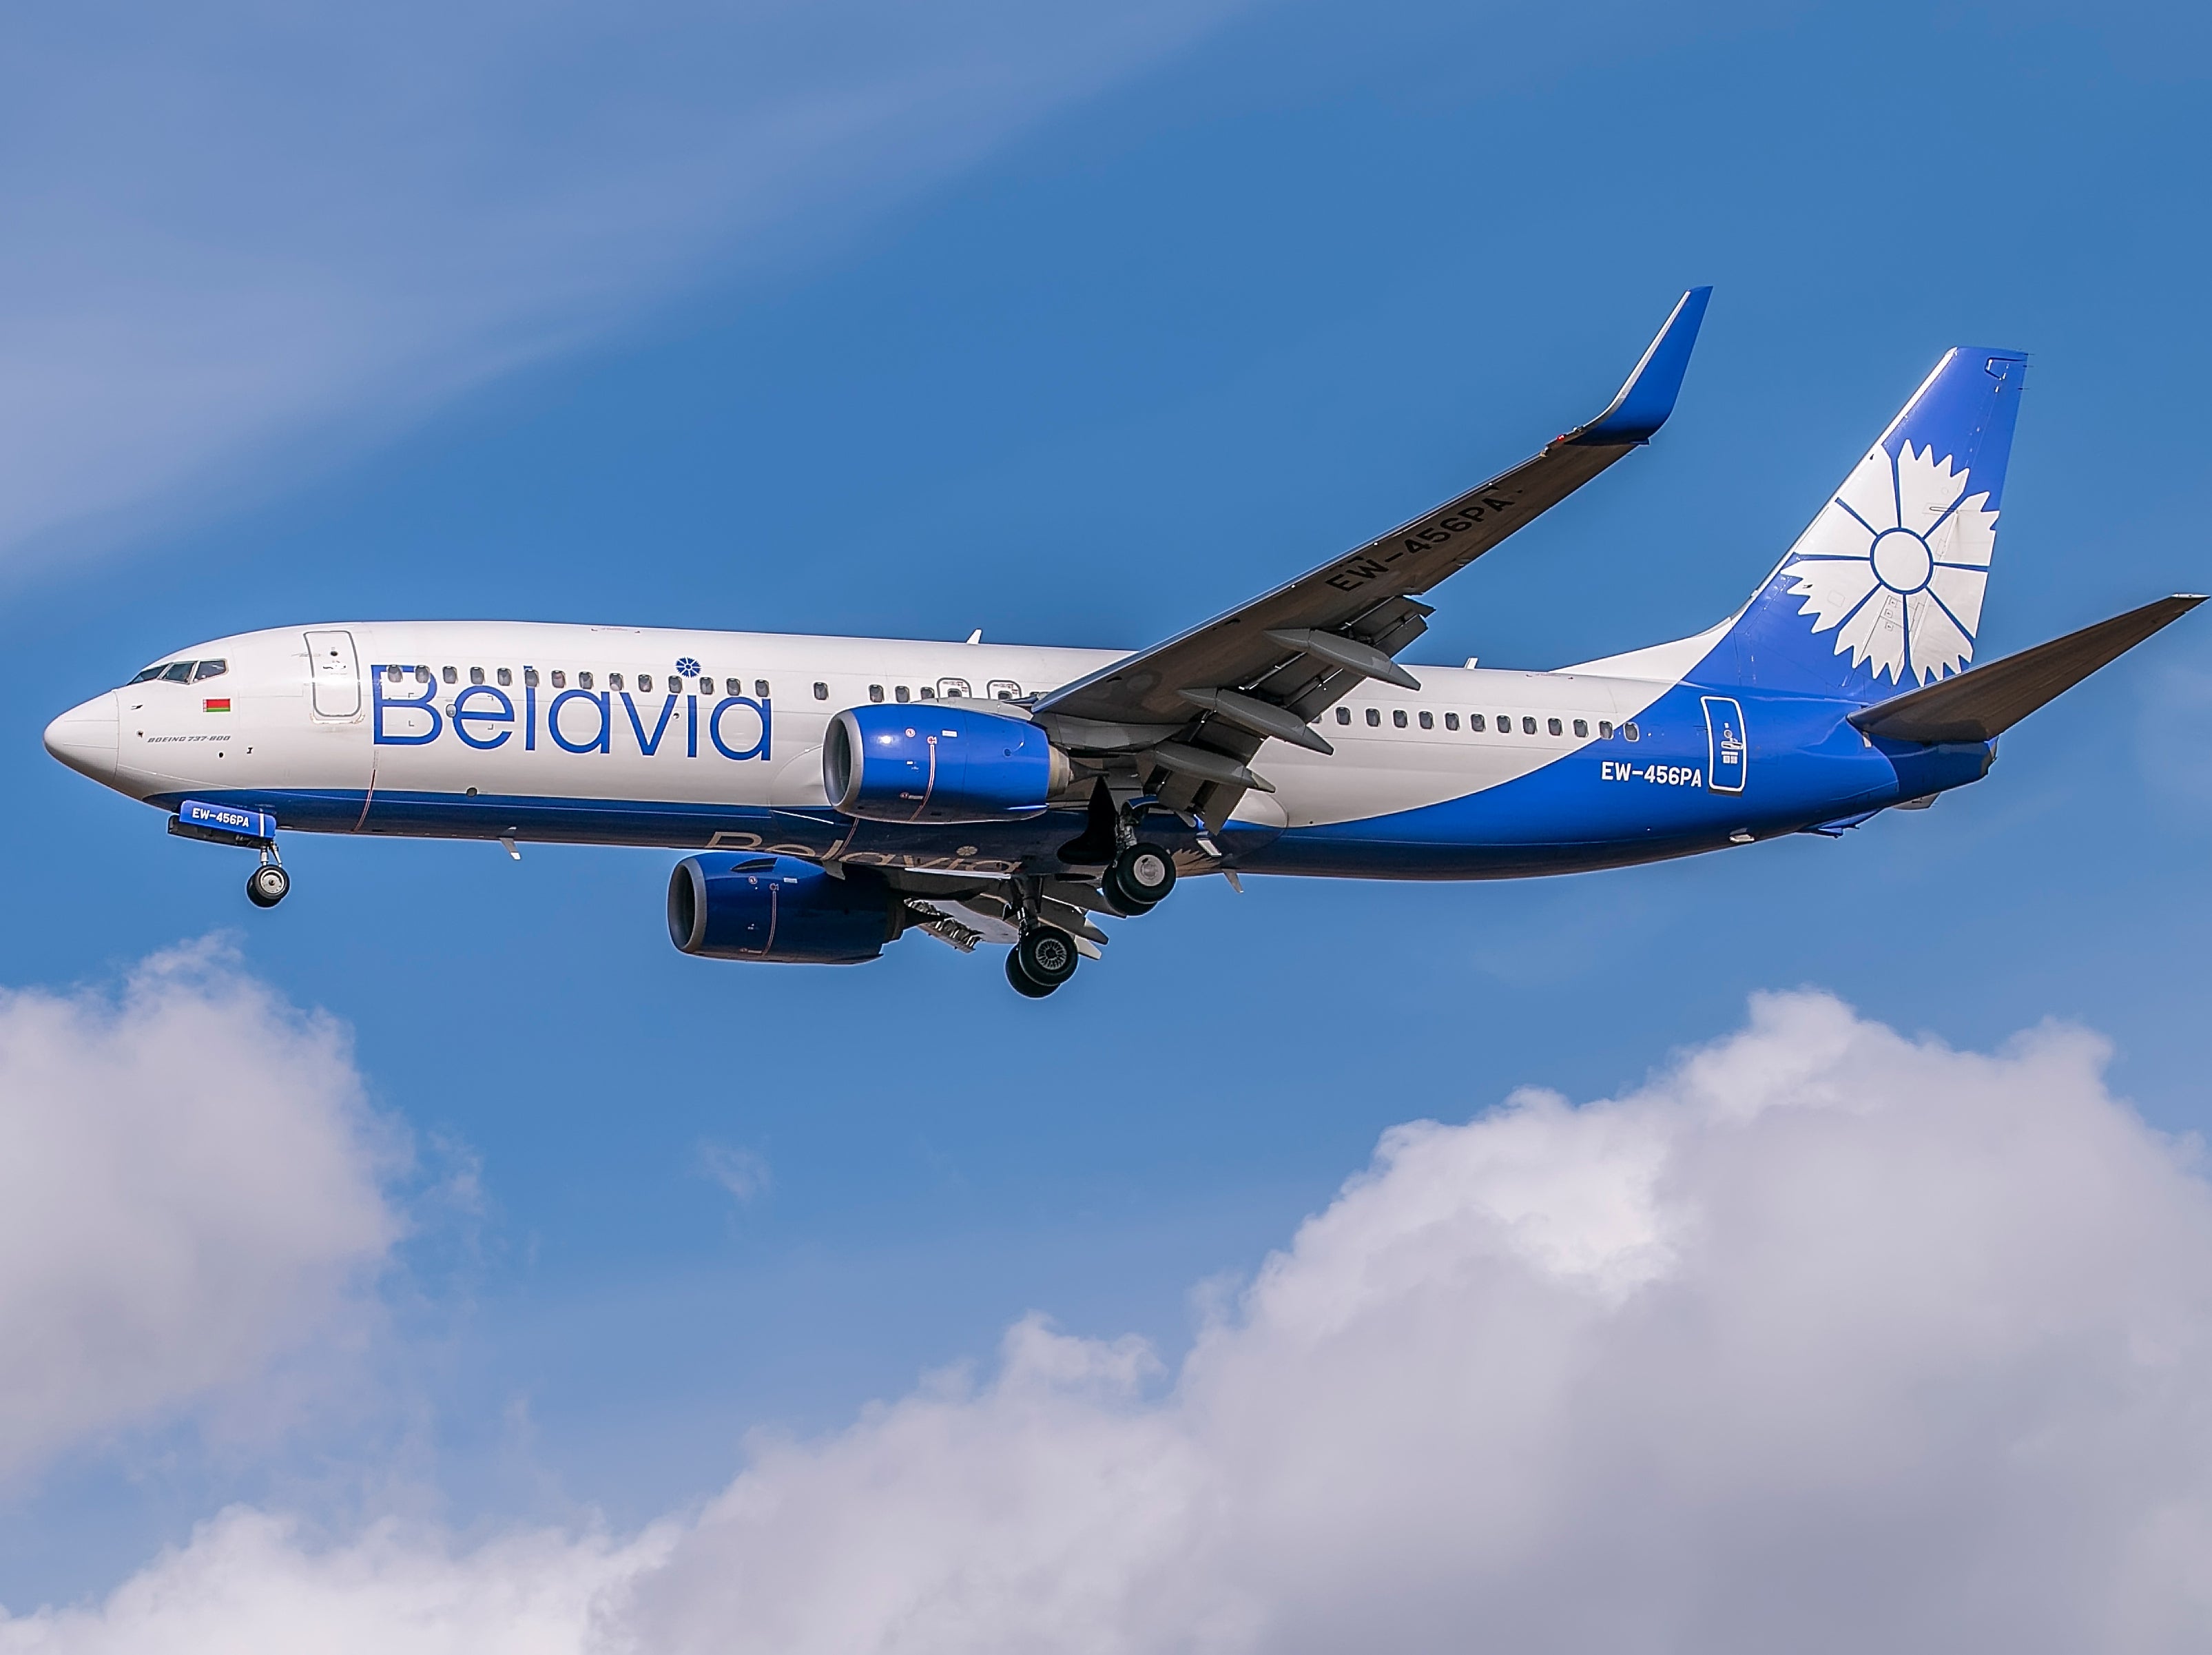 The EU has urged carriers to swerve Belarus airspace